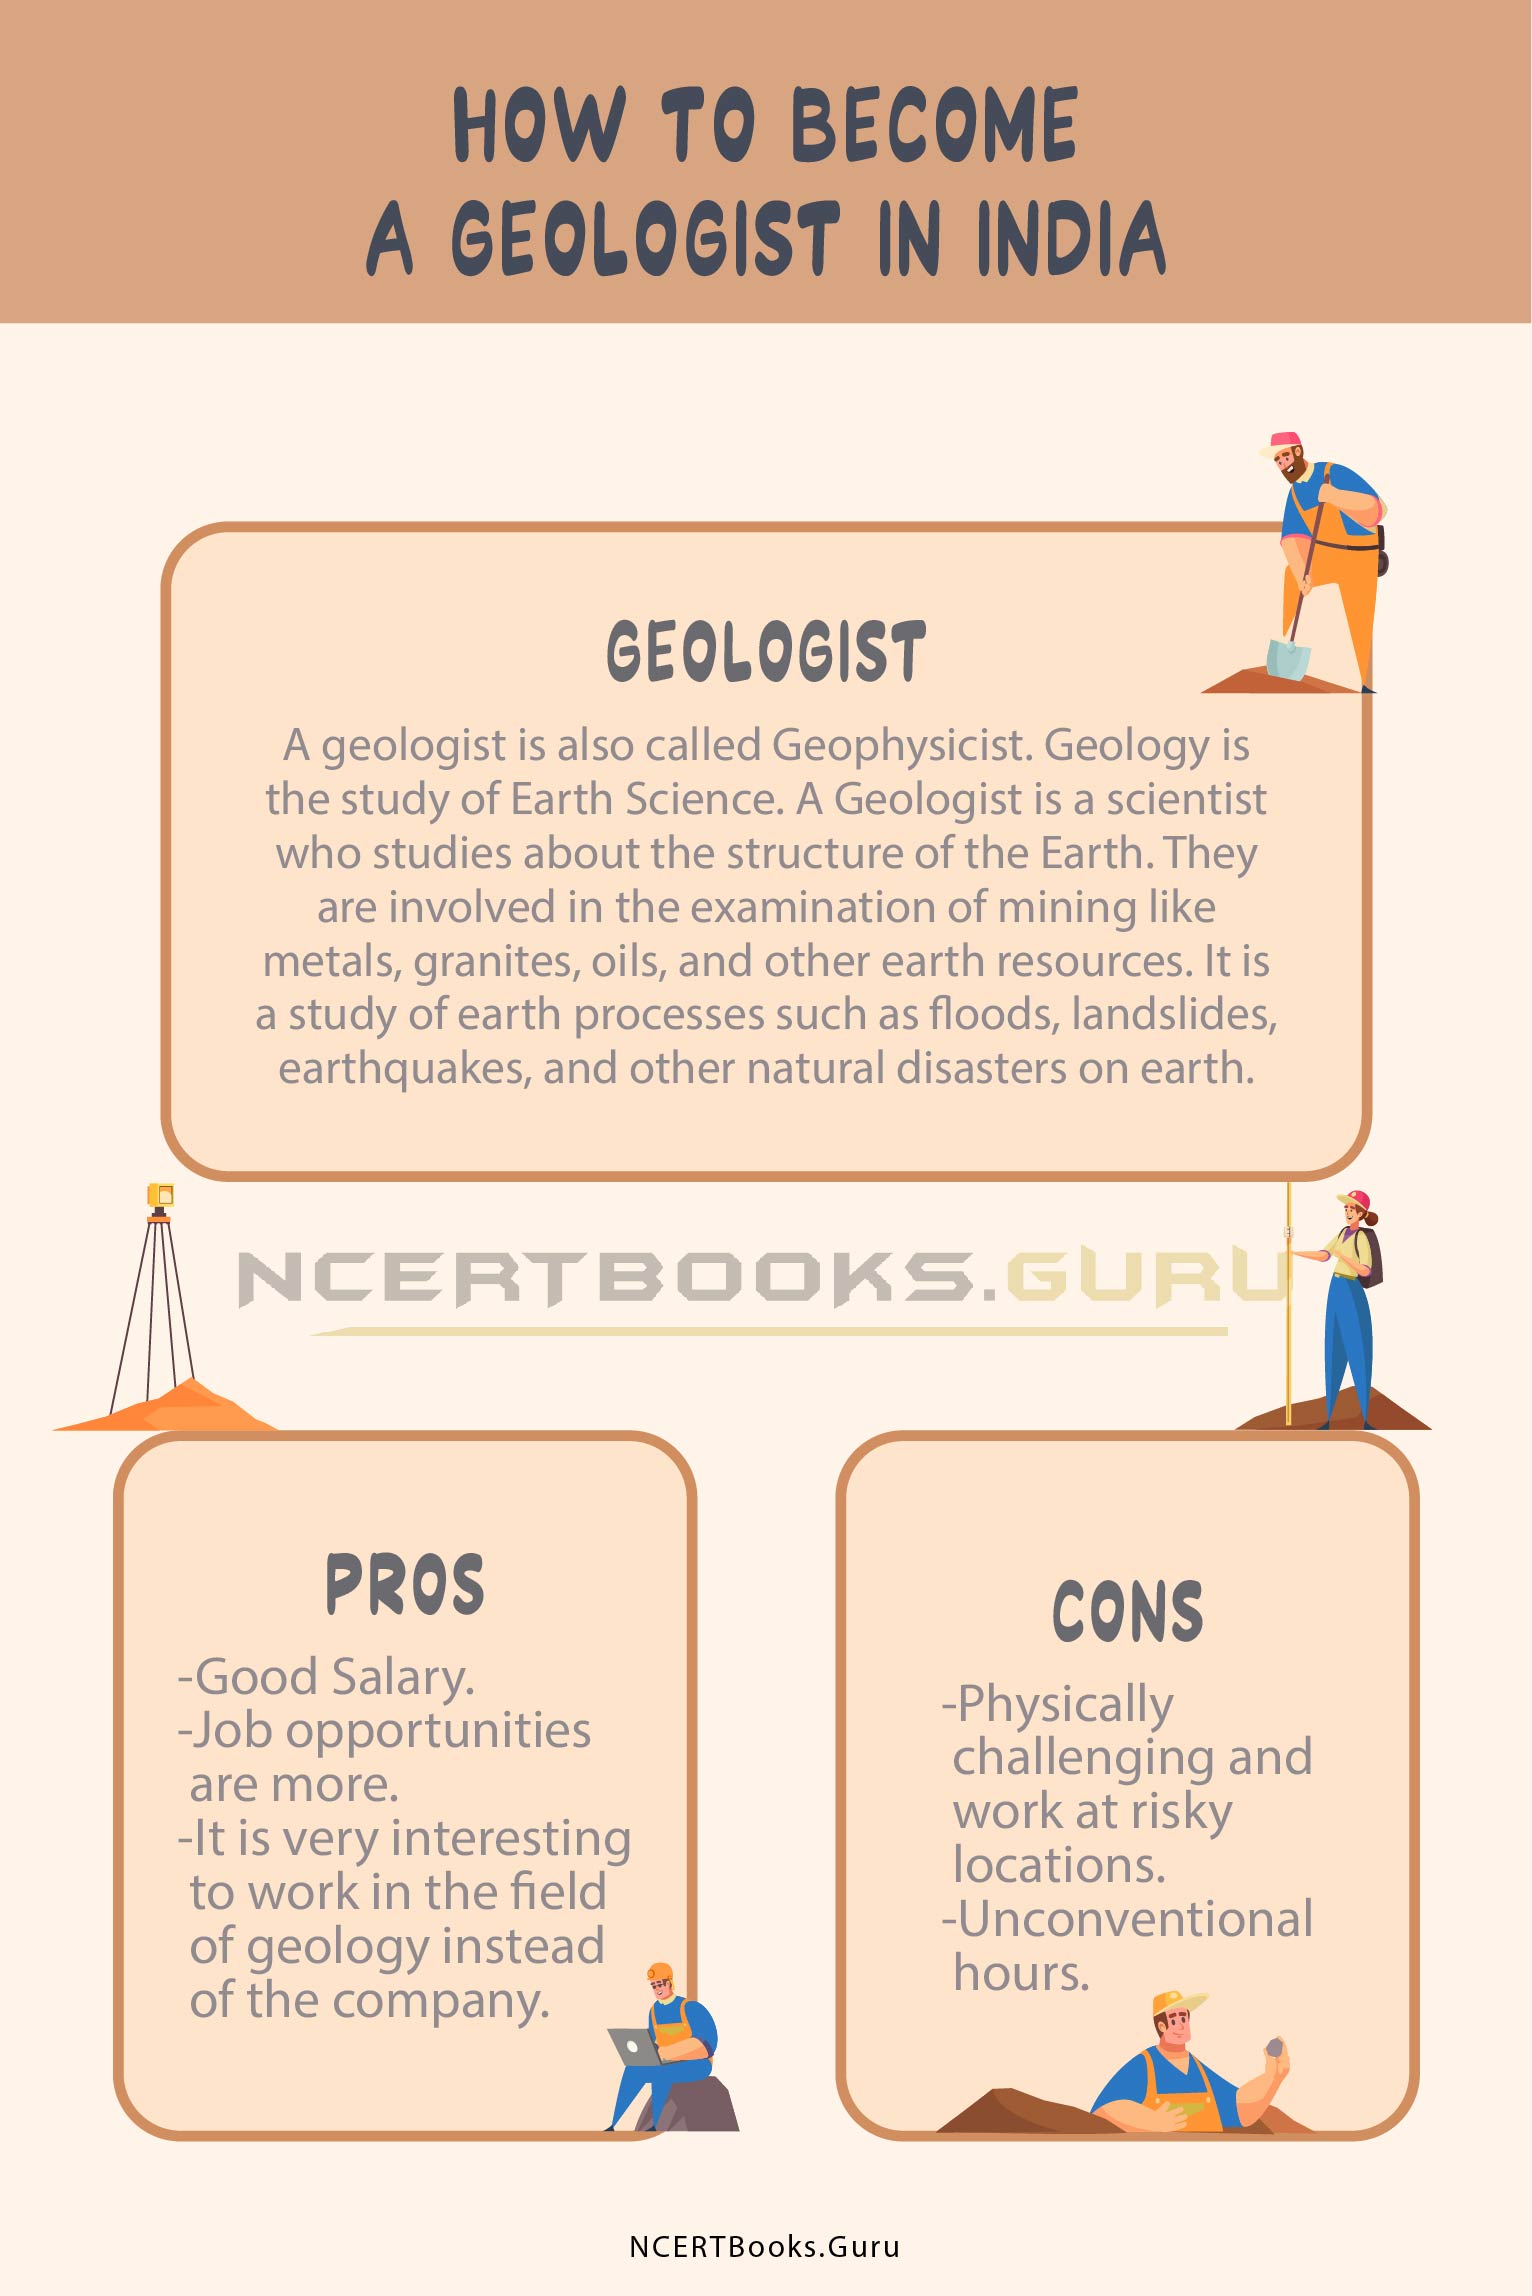 How to become A Geologist in India